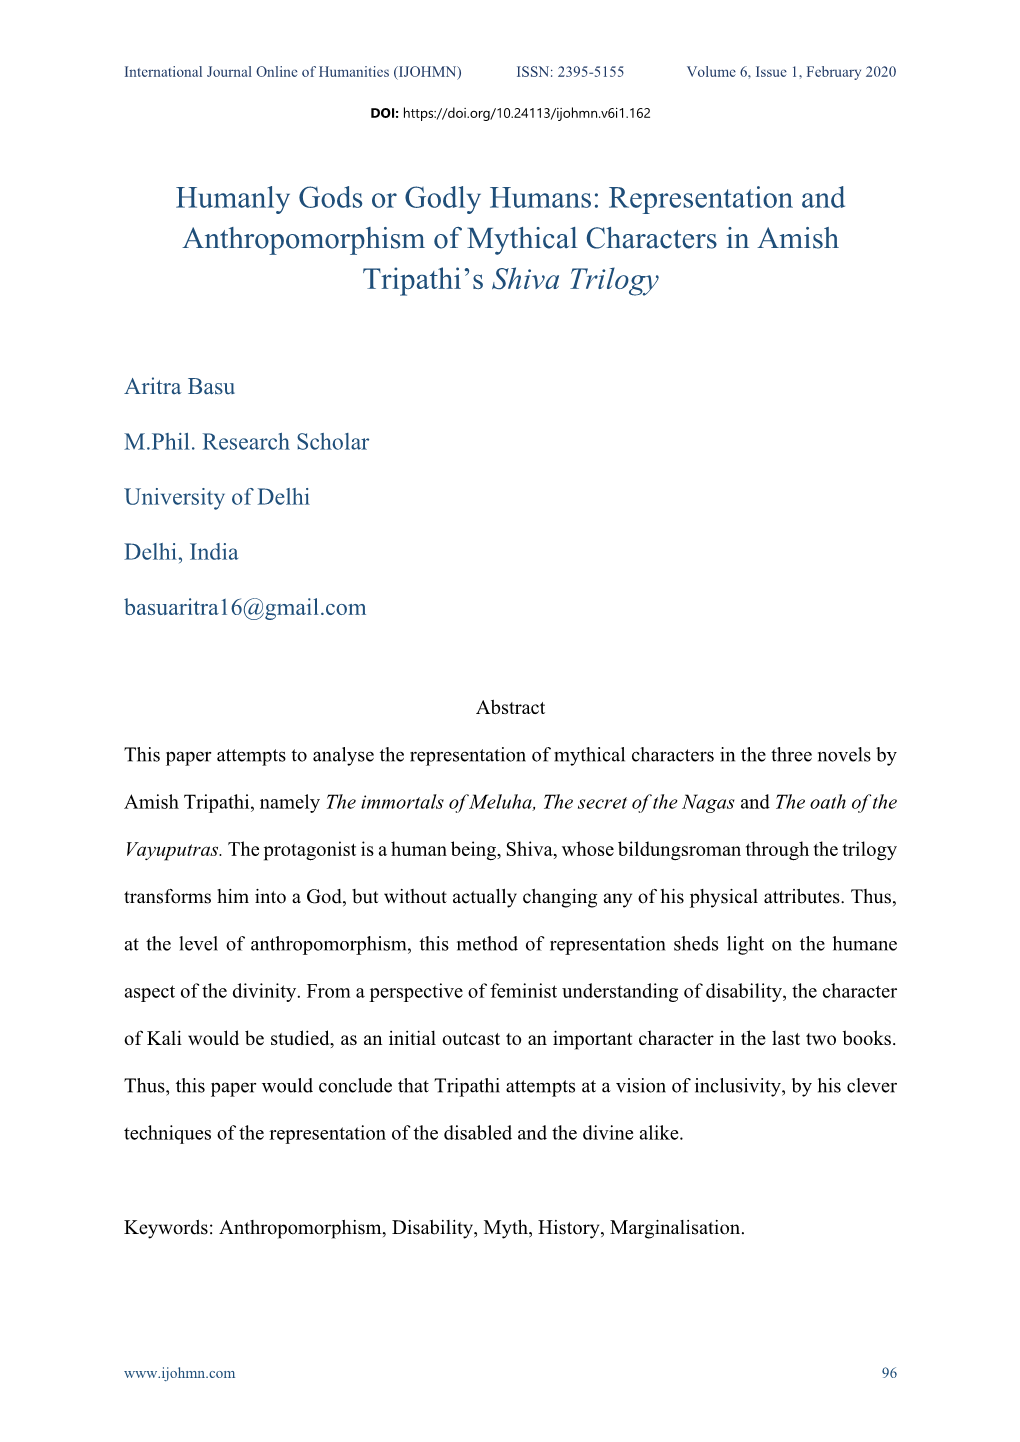 Representation and Anthropomorphism of Mythical Characters in Amish Tripathi's Shiva Trilogy